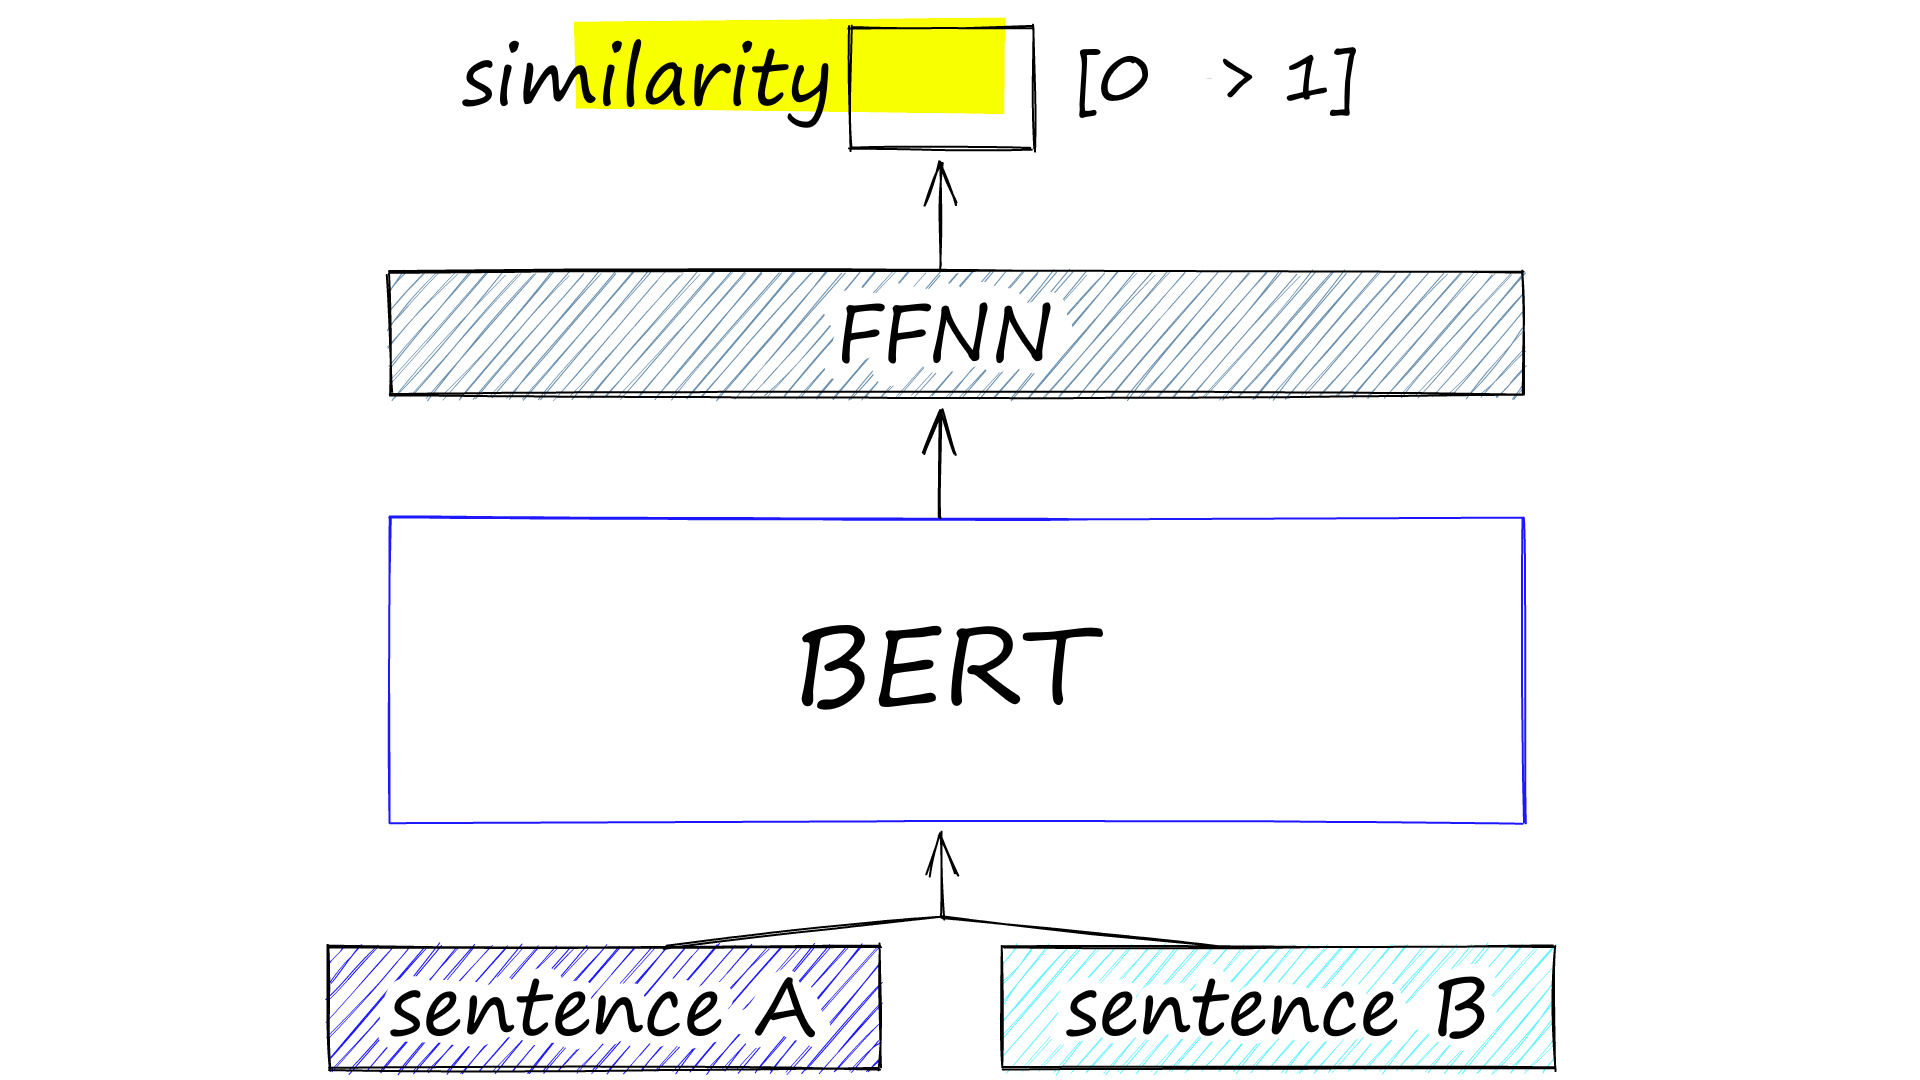 The BERT cross-encoder architecture consists of a BERT model which consumes sentences A and B. Both are processed in the same sequence, separated by a [SEP] token. All of this is followed by a feedforward NN classifier that outputs a similarity score.